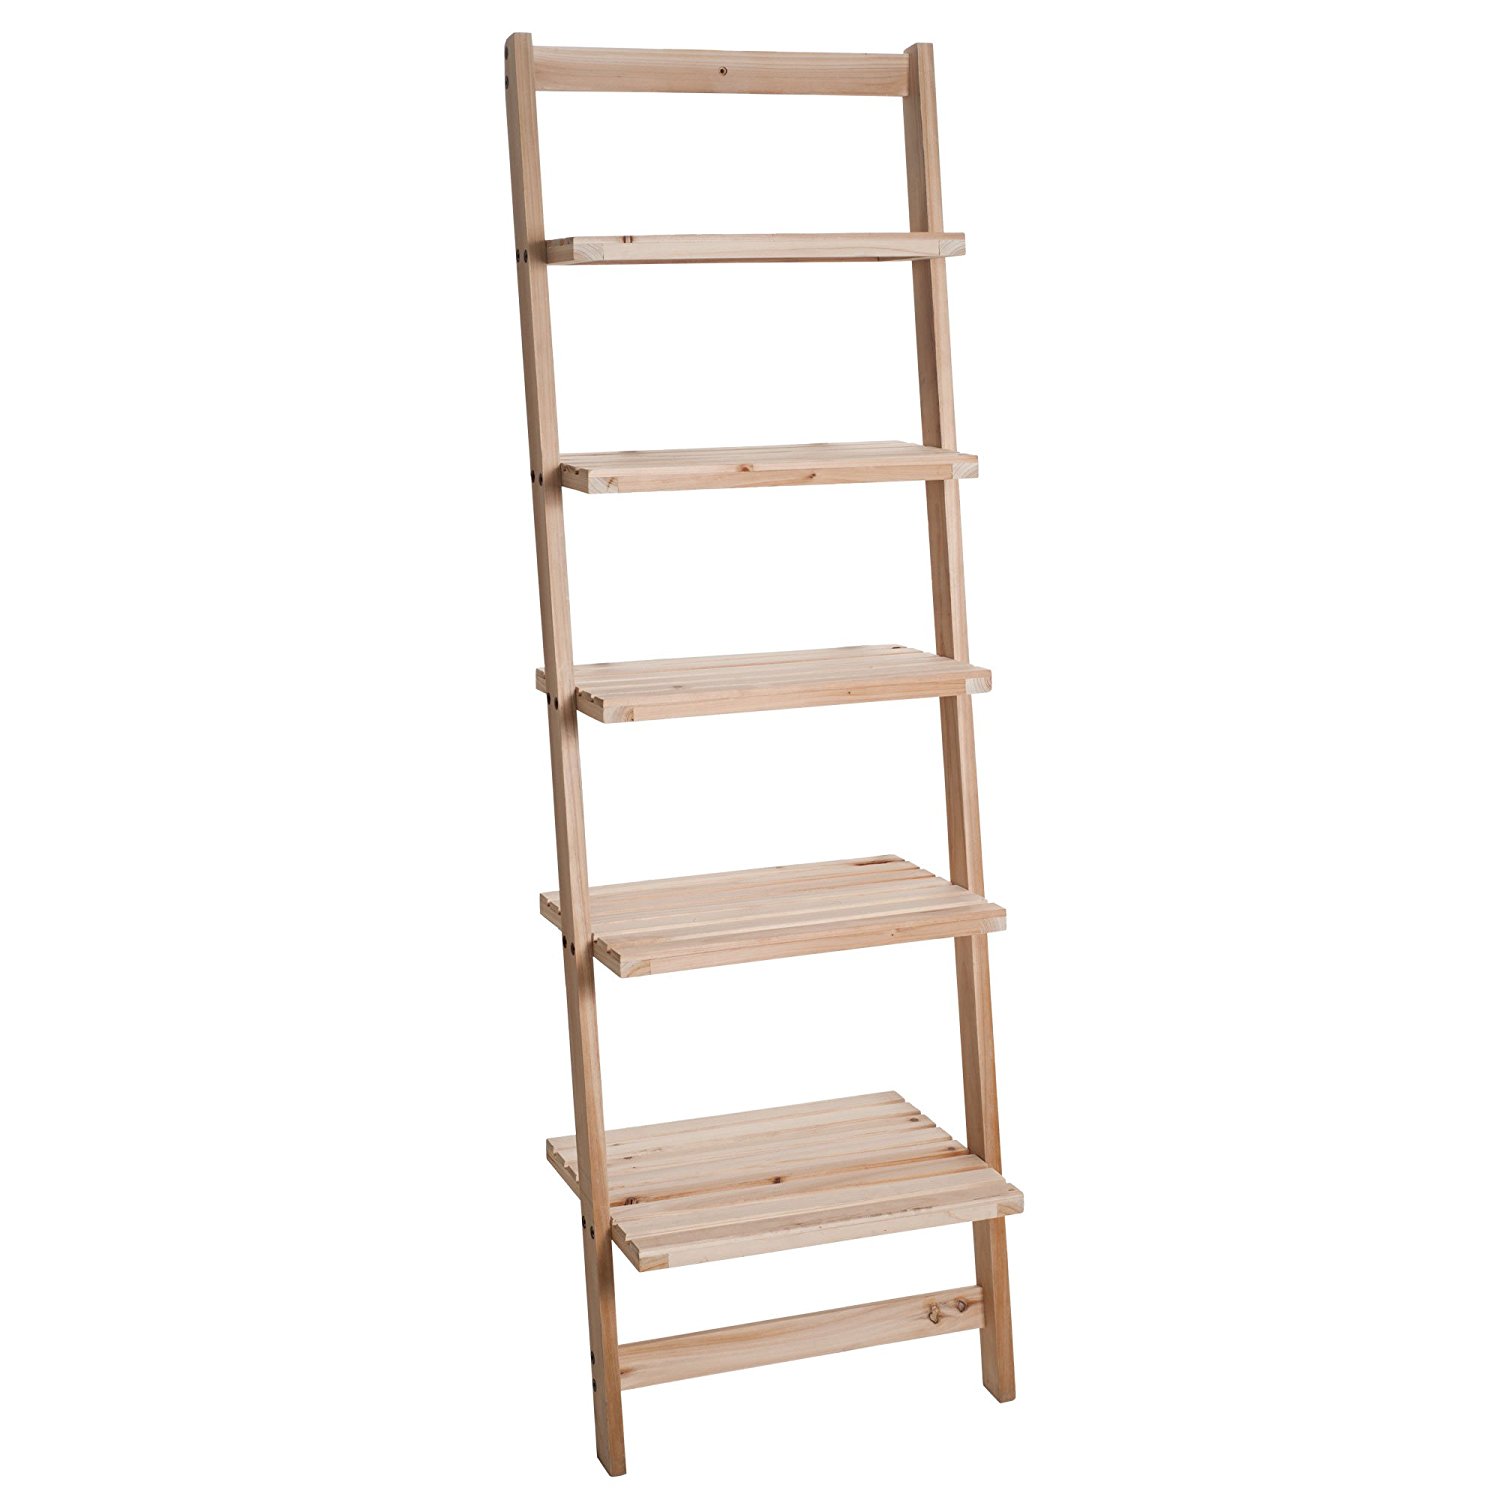 Rustic Farmhouse Style Ladders Under $50